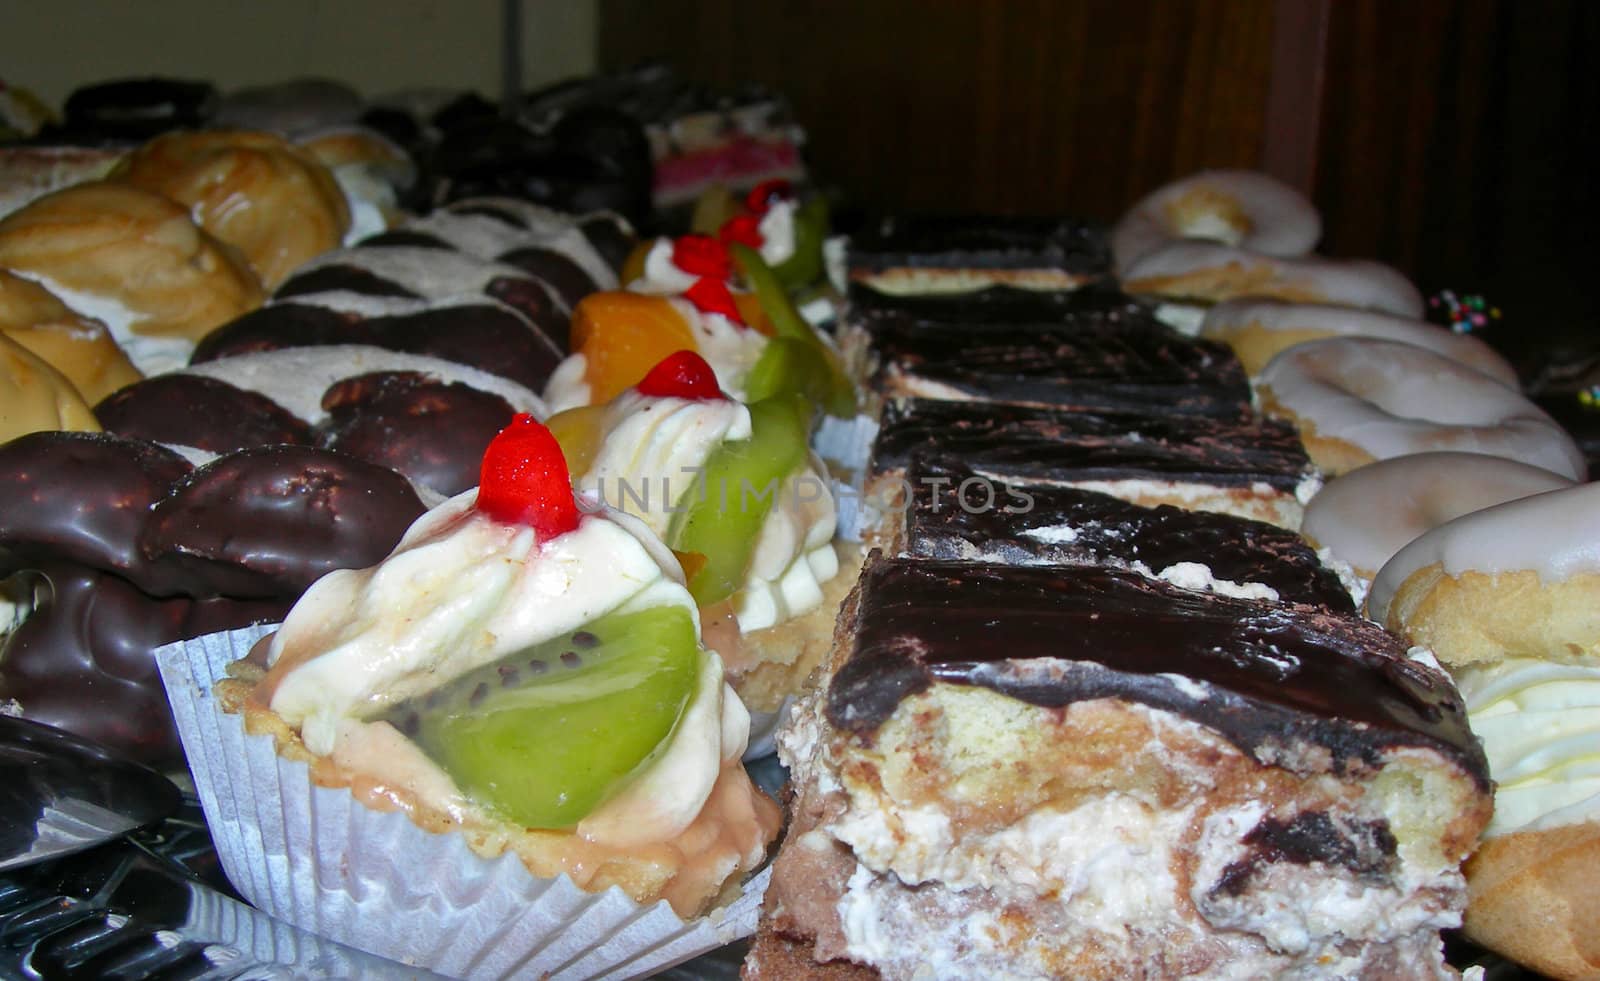 Variety of tasty desserts with cream and chocolate on a dish